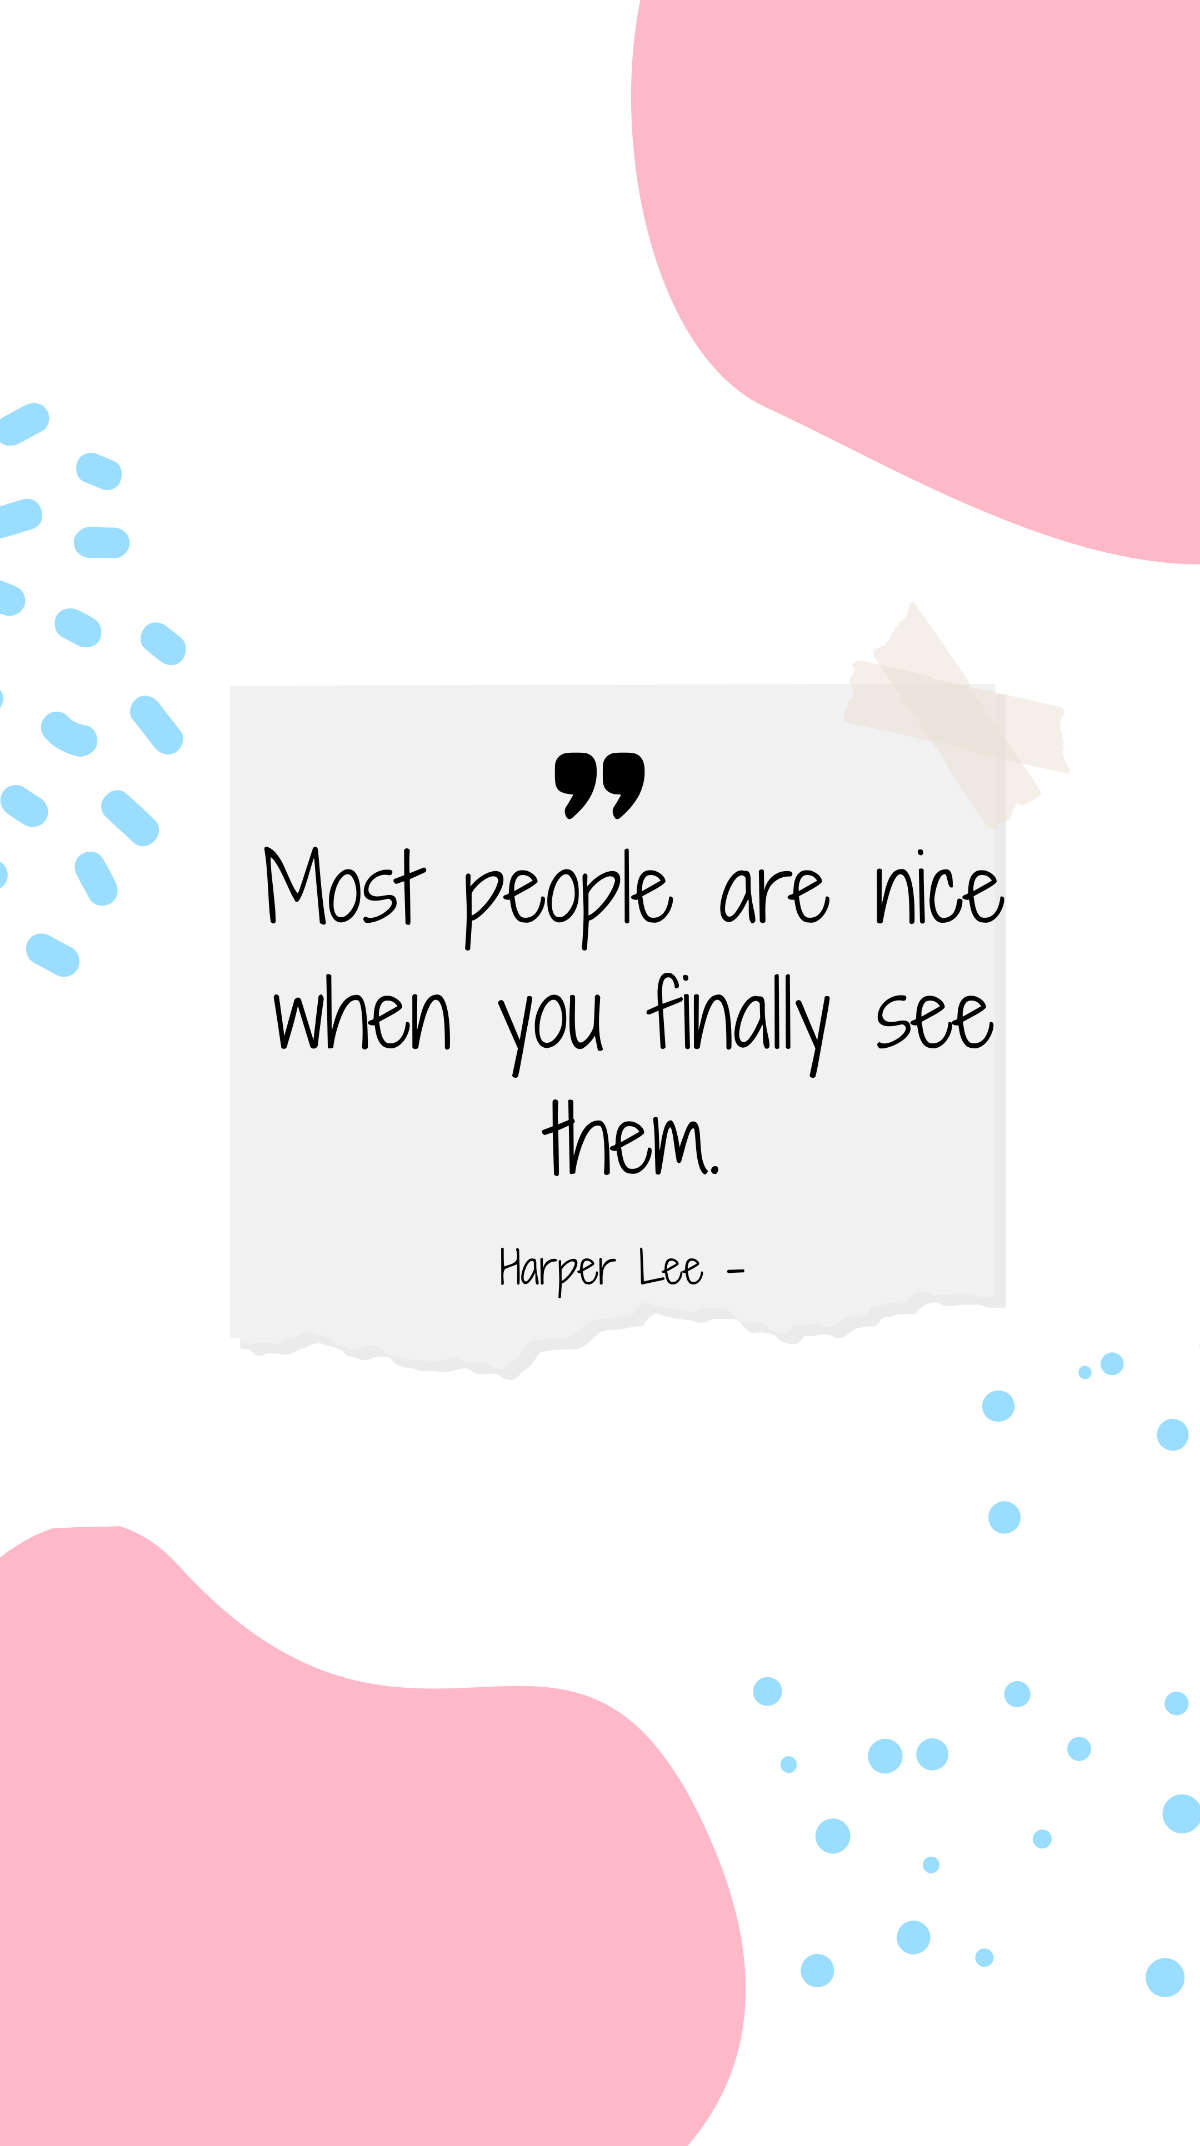 Harper Lee - Most people are nice when you finally see them. Template